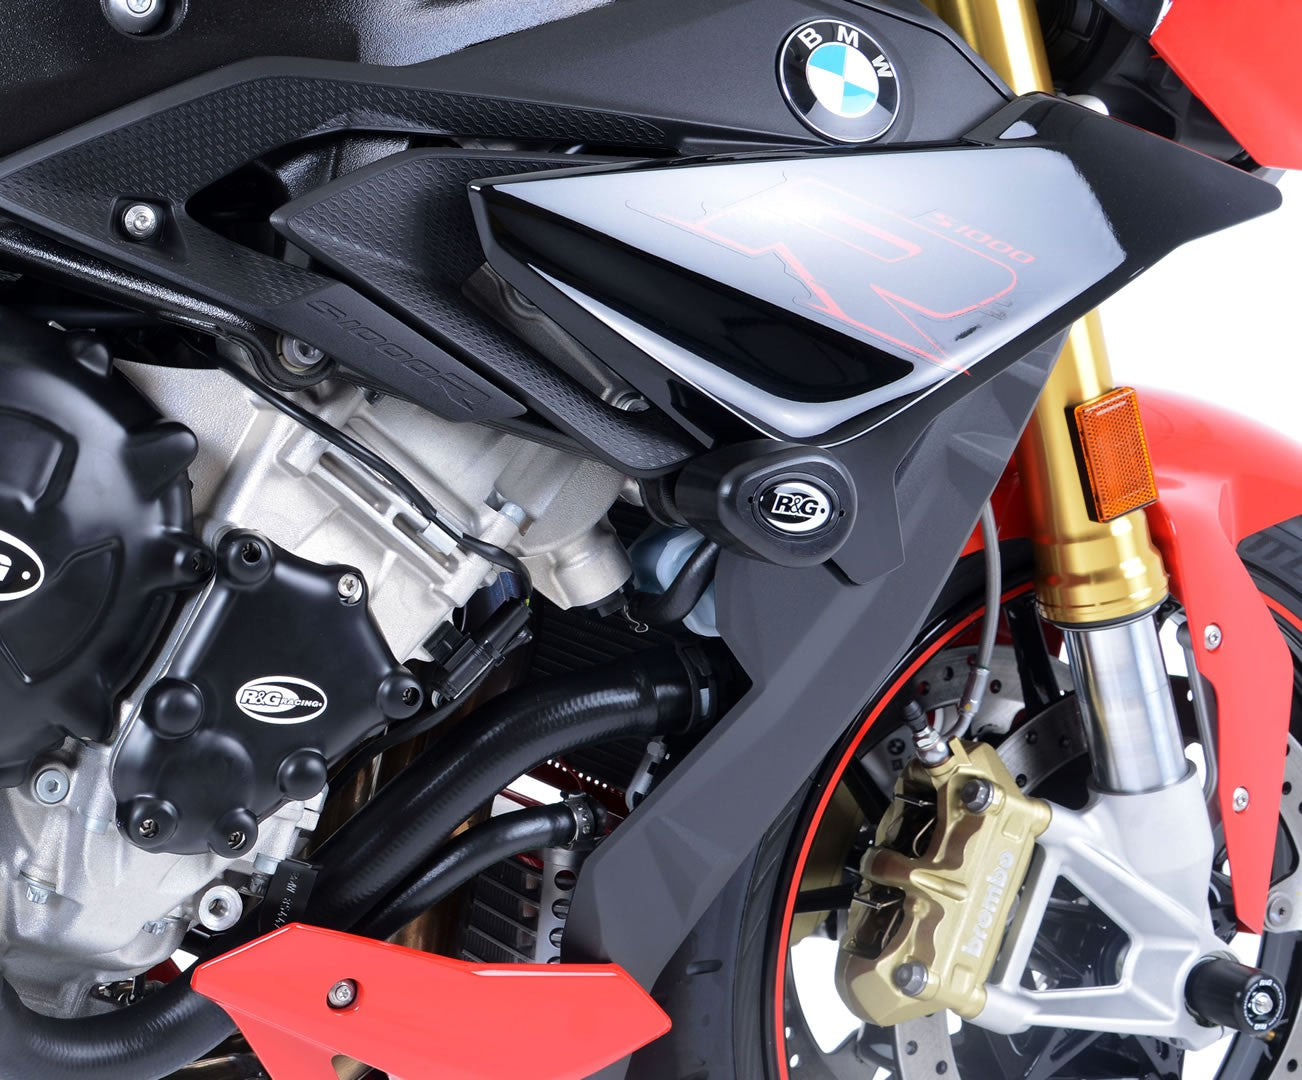 R&G Crash Protector for BMW S 1000 R